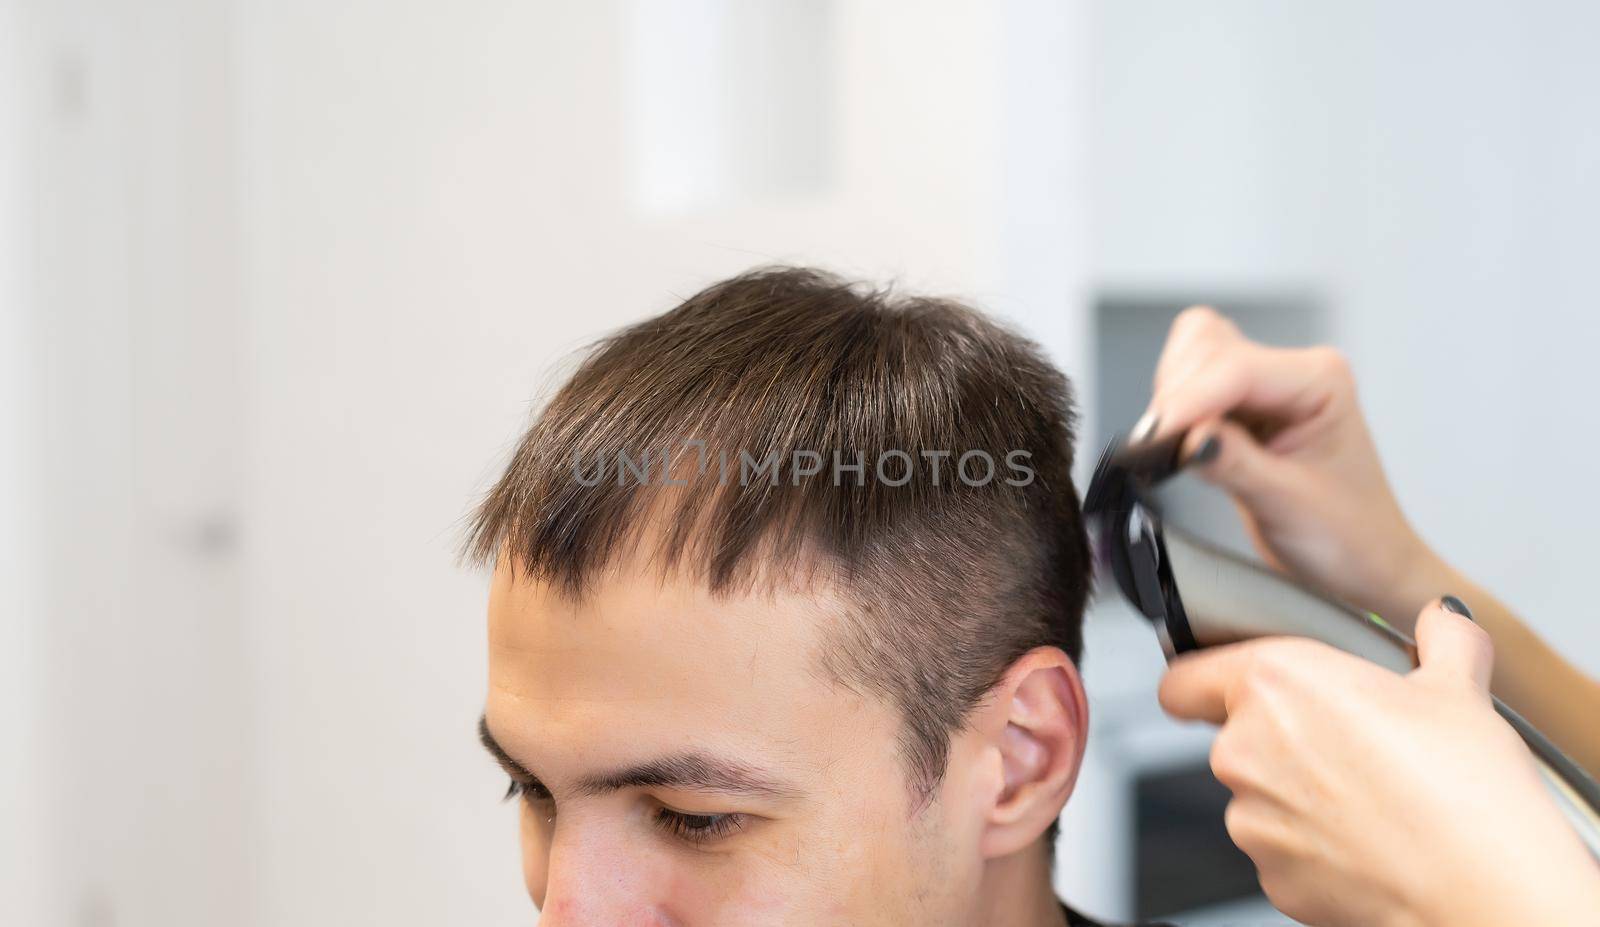 Man's hairstyle by means of the special machine for a hairstyle